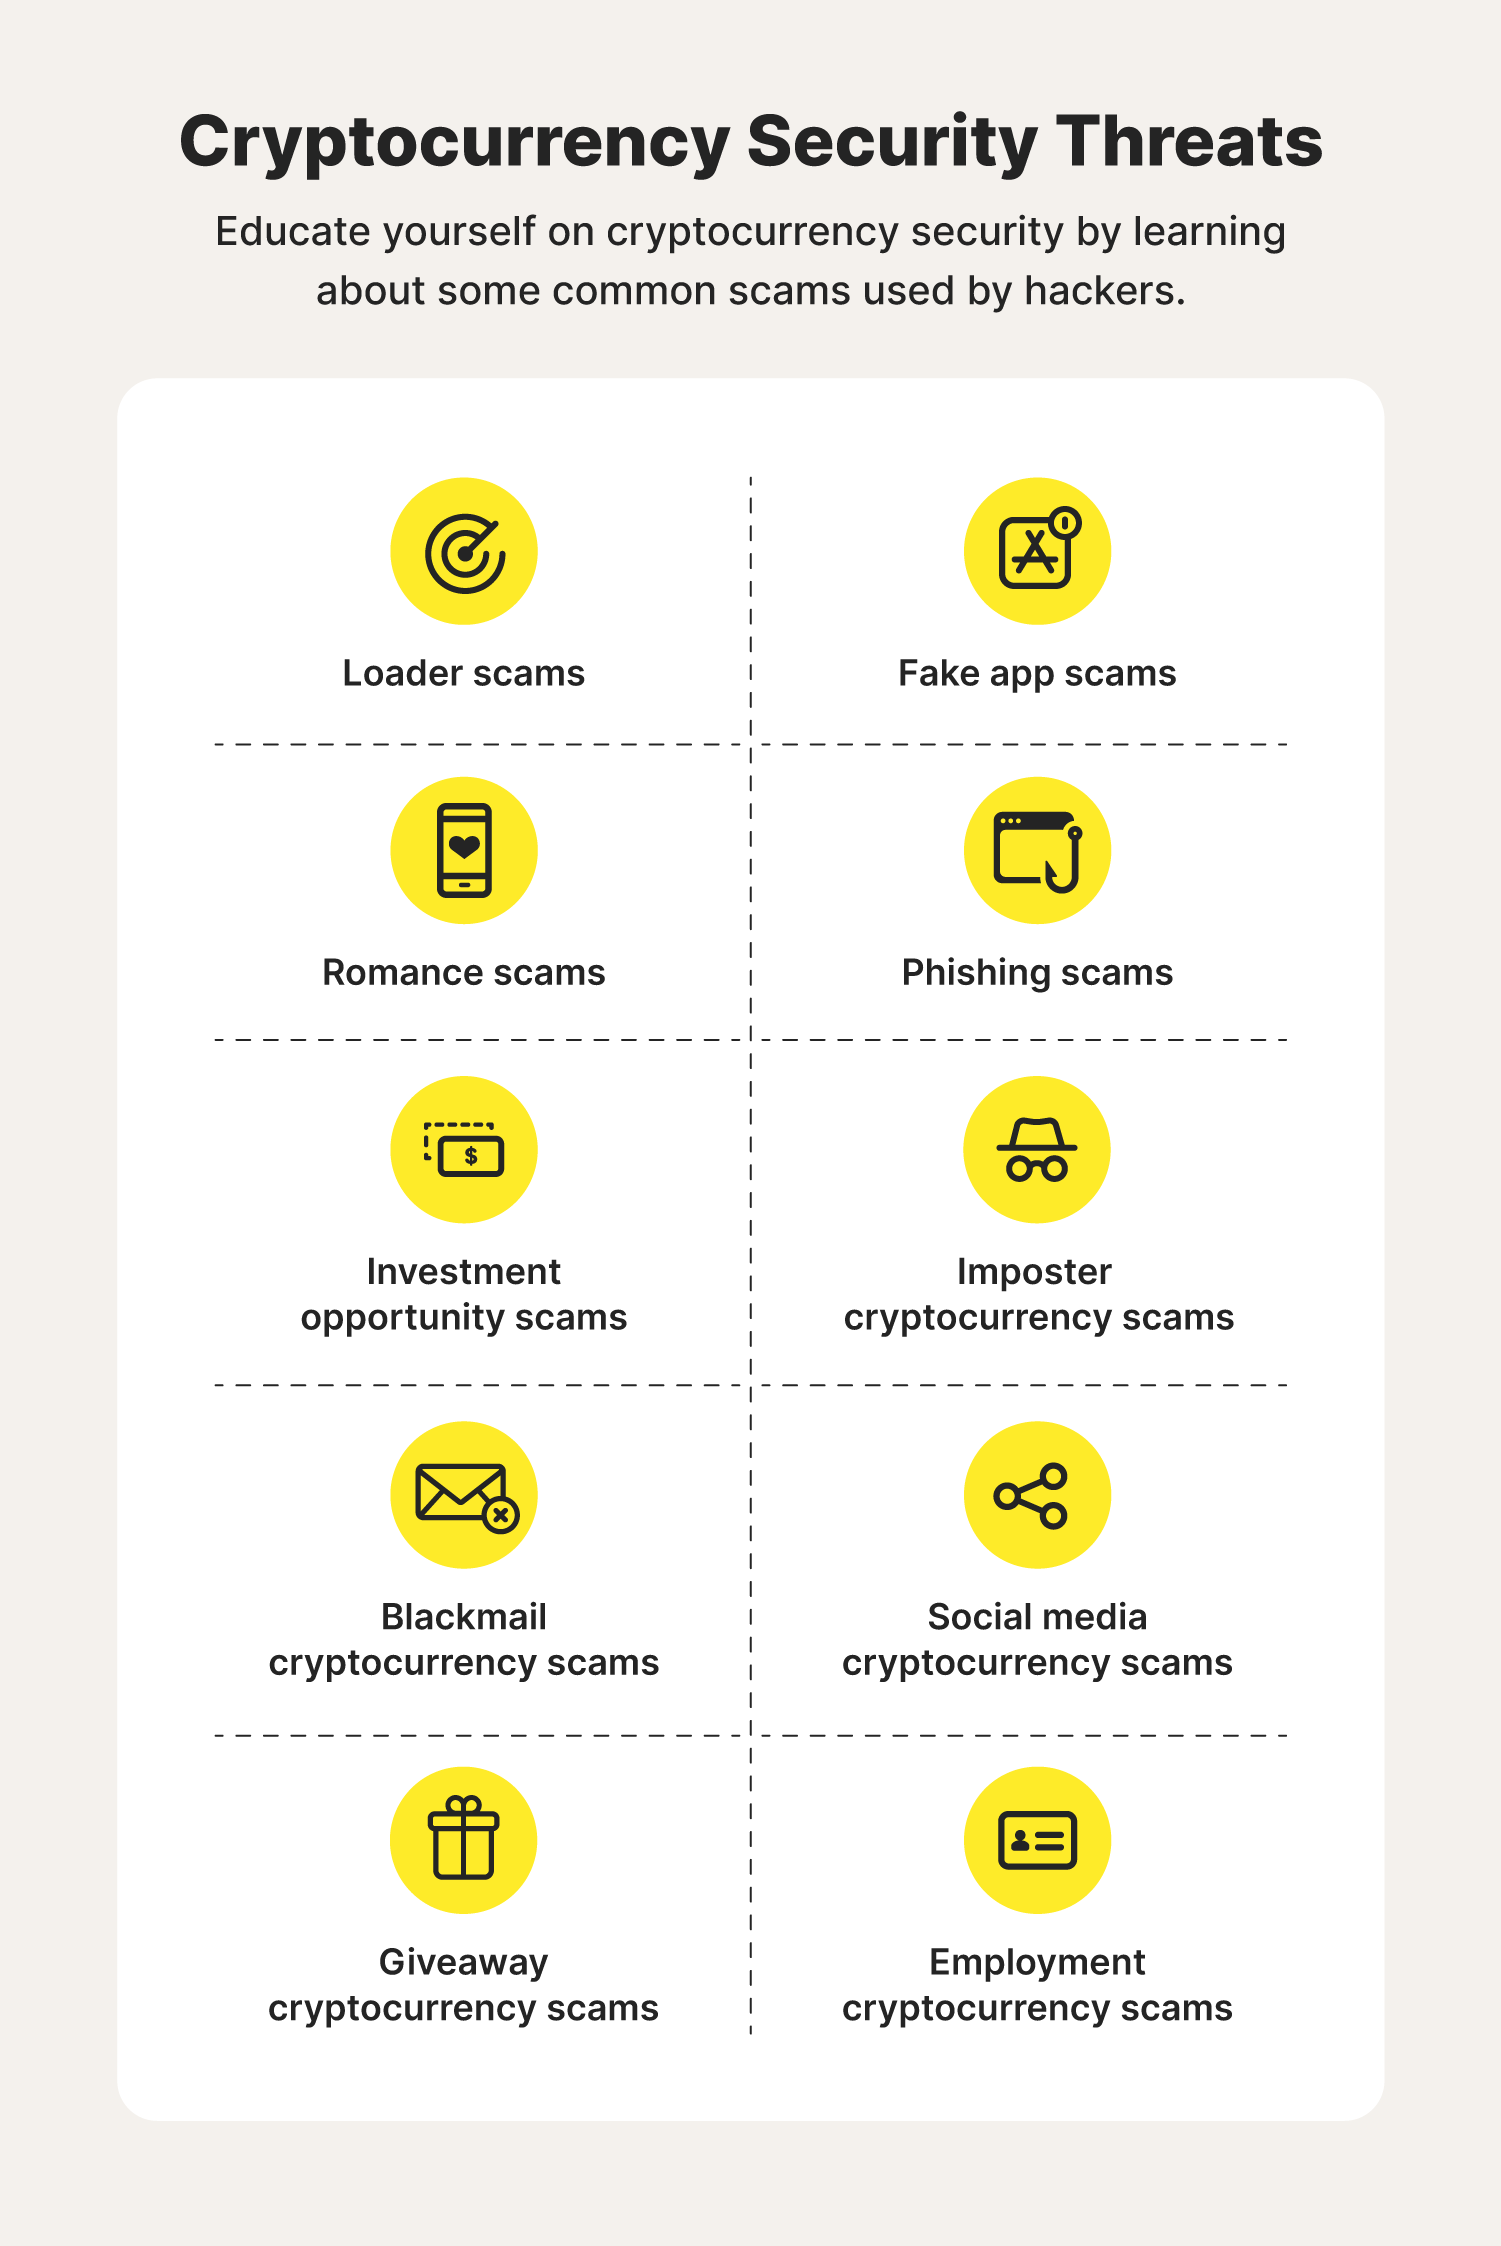 10 icons support a list of cryptocurrency security threats to know, mainly cryptocurrency scams.